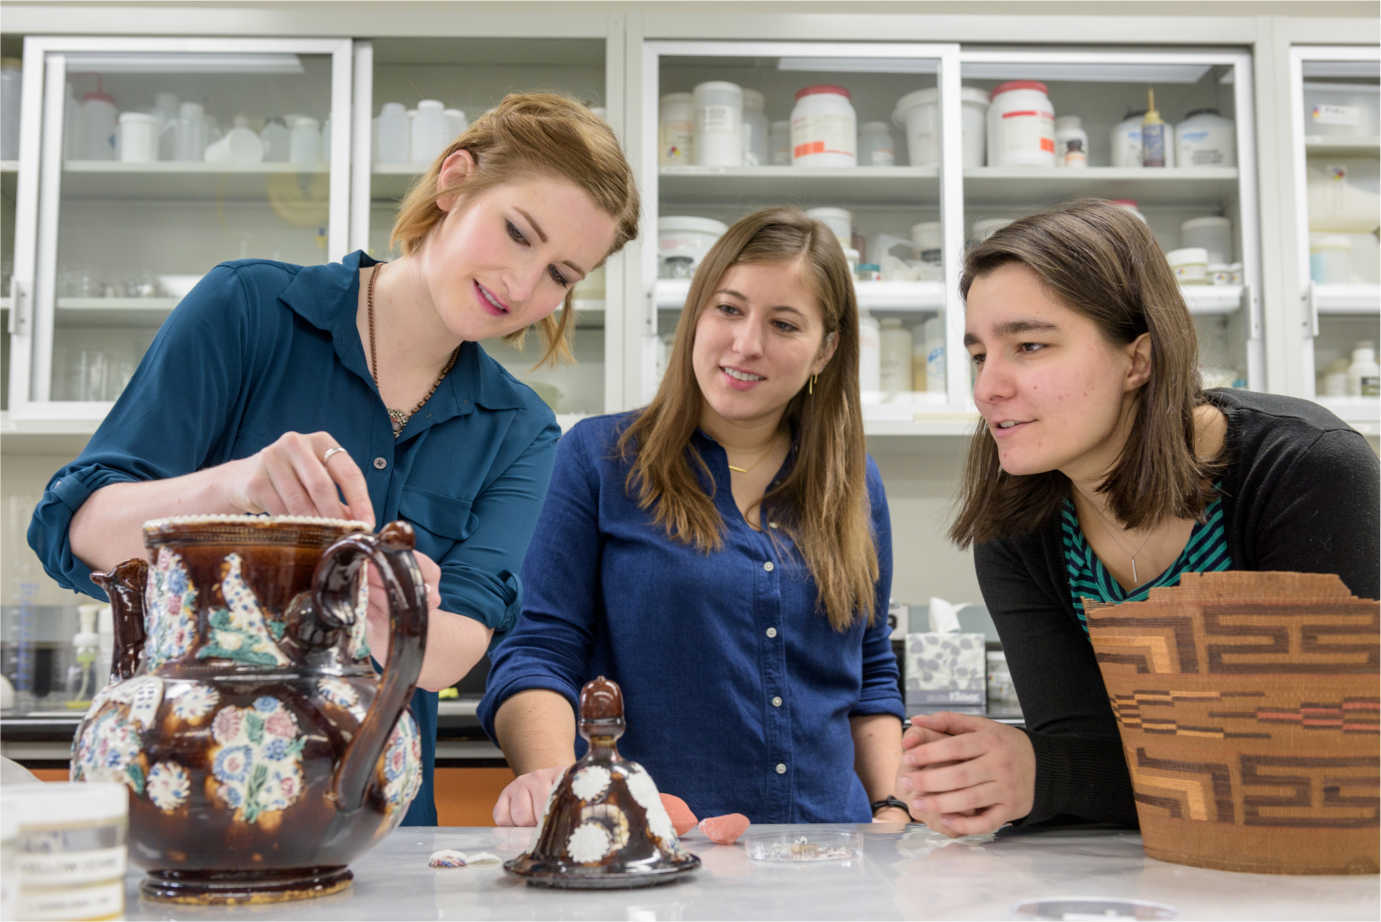 Leah Bright, Samantha Owens, and Madeline Corona (from left to right), NEH Fellows in the Winterthur/University of Delaware Program in Art Conservation, examine a few of their conservation projects including a 19th-century English earthenware teapot as part of their second year of study in object conservation.  Image courtesy of Evan Krape, University of Delaware.